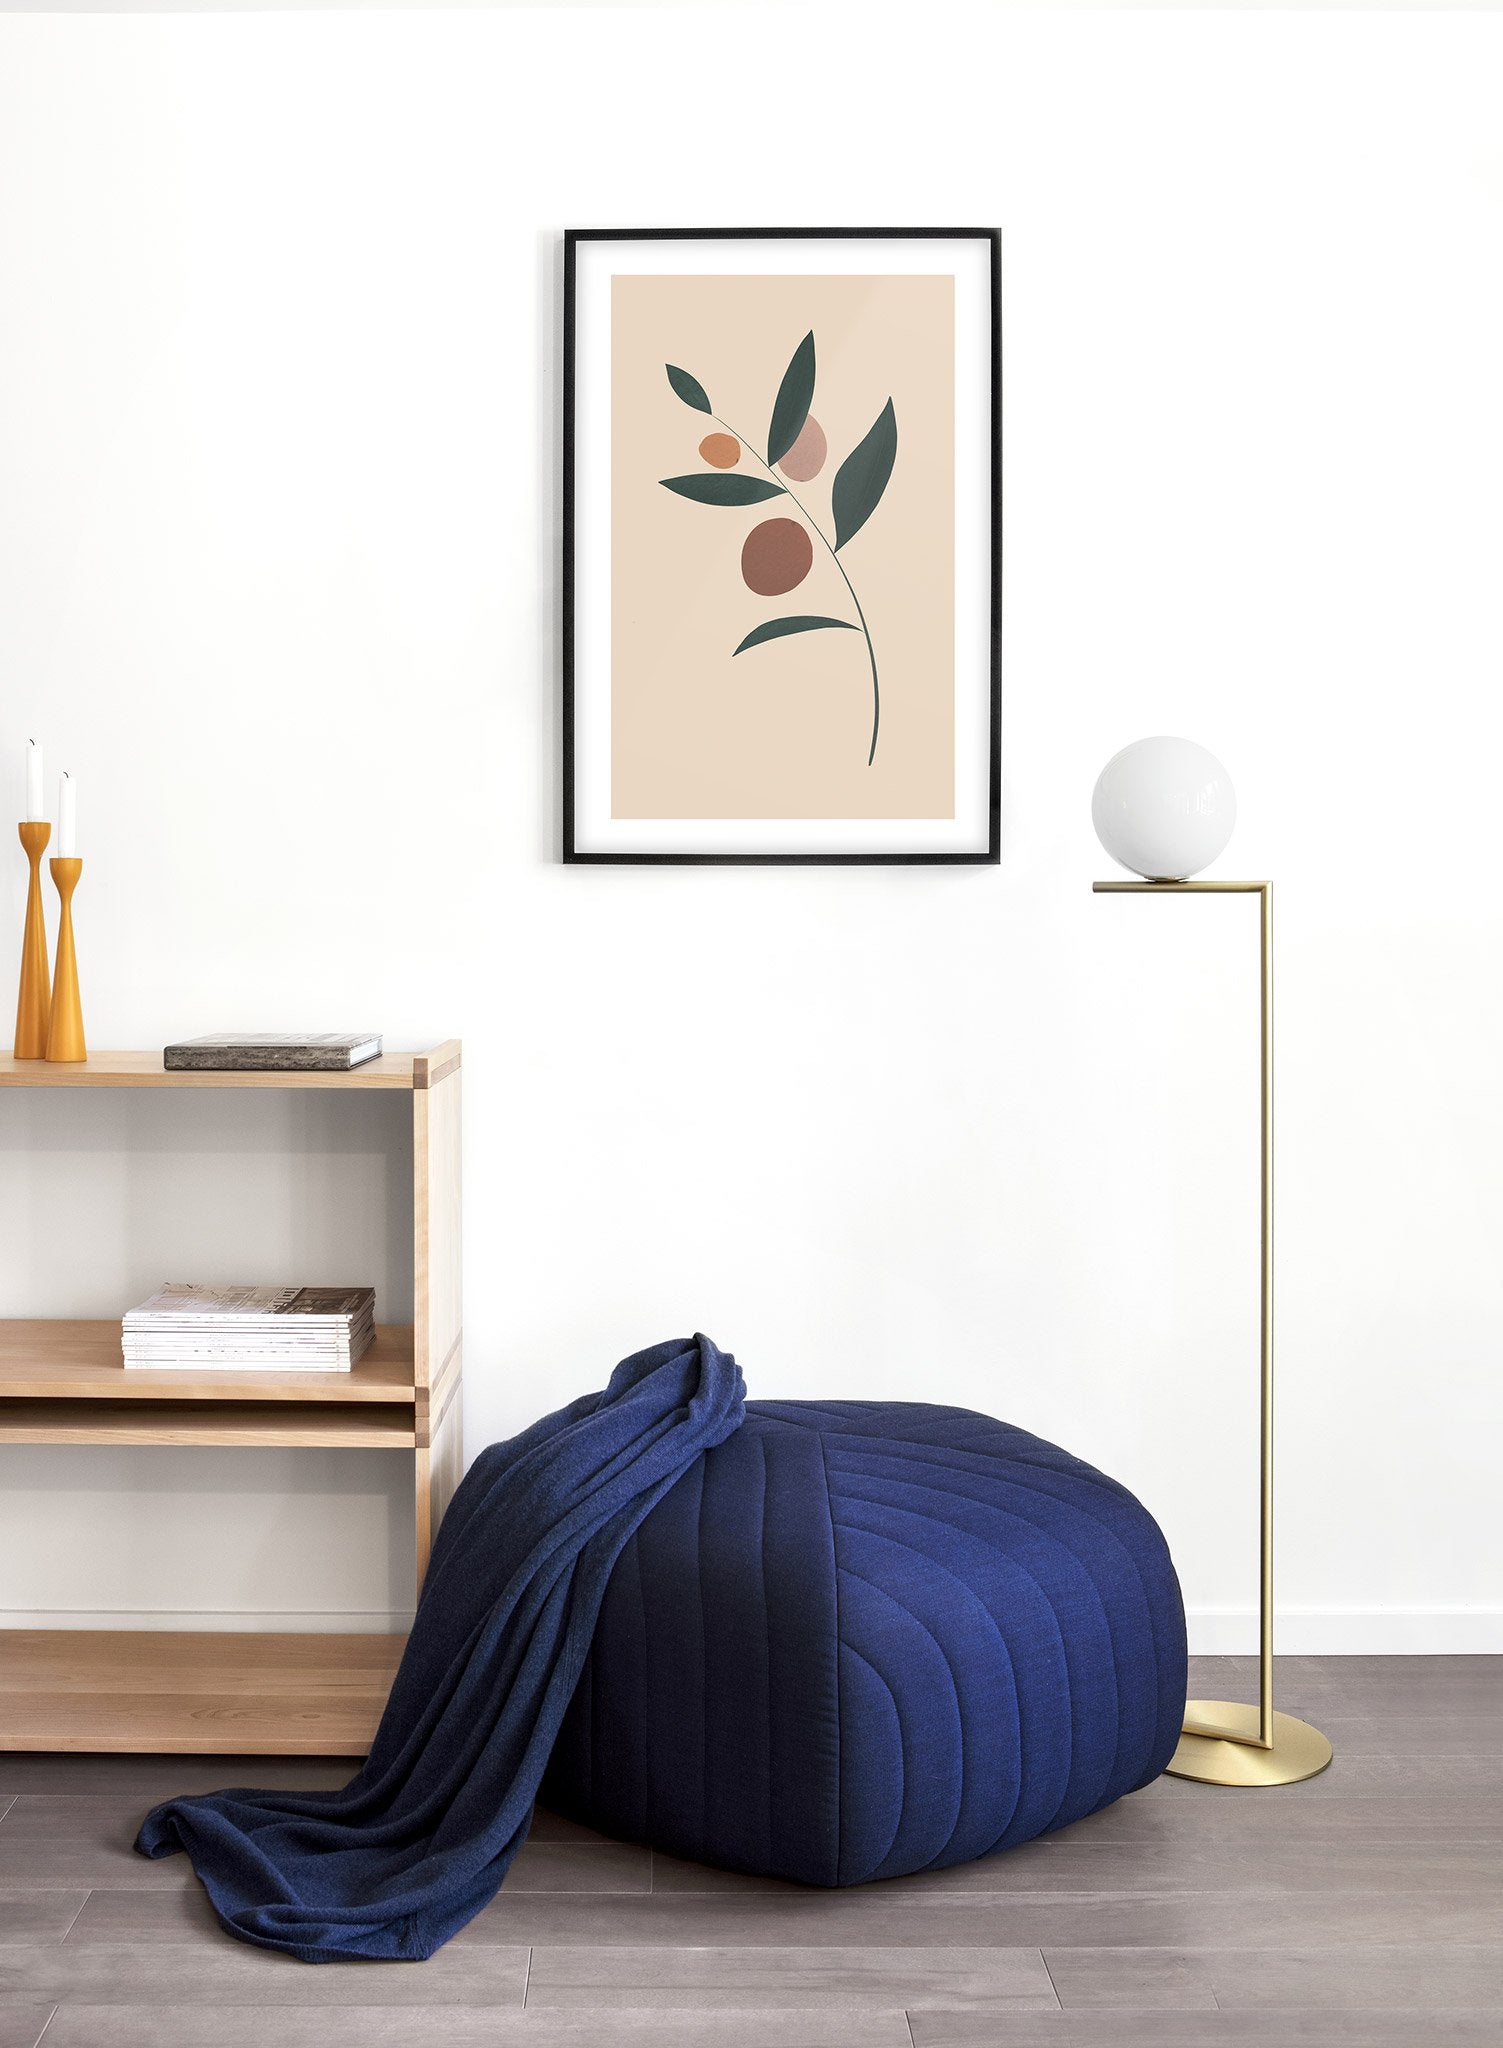 Modern minimalist poster by Opposite Wall with single leaf on beige background - Lifestyle - Living Room